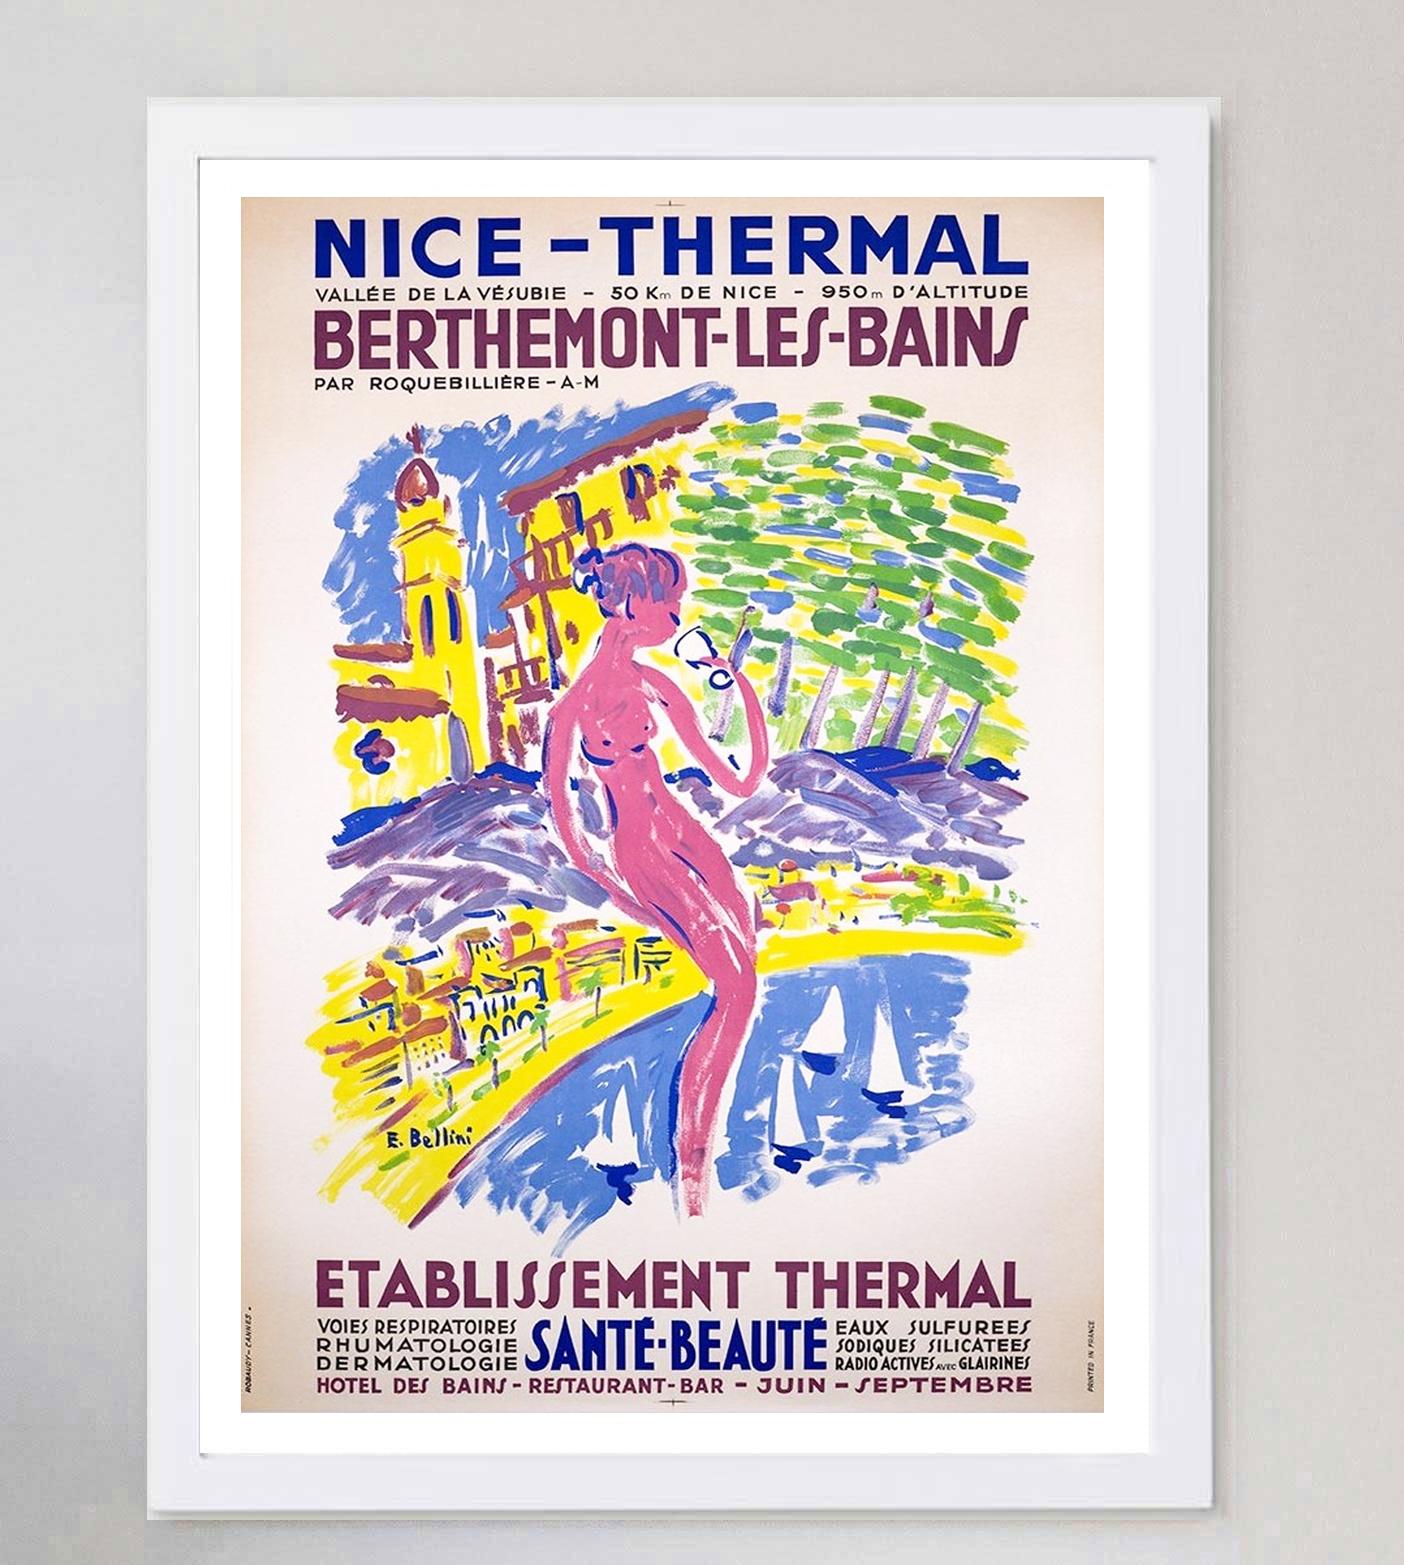 1960 Nice - Thermal Berthemont-les-bains Original Vintage Poster In Good Condition For Sale In Winchester, GB